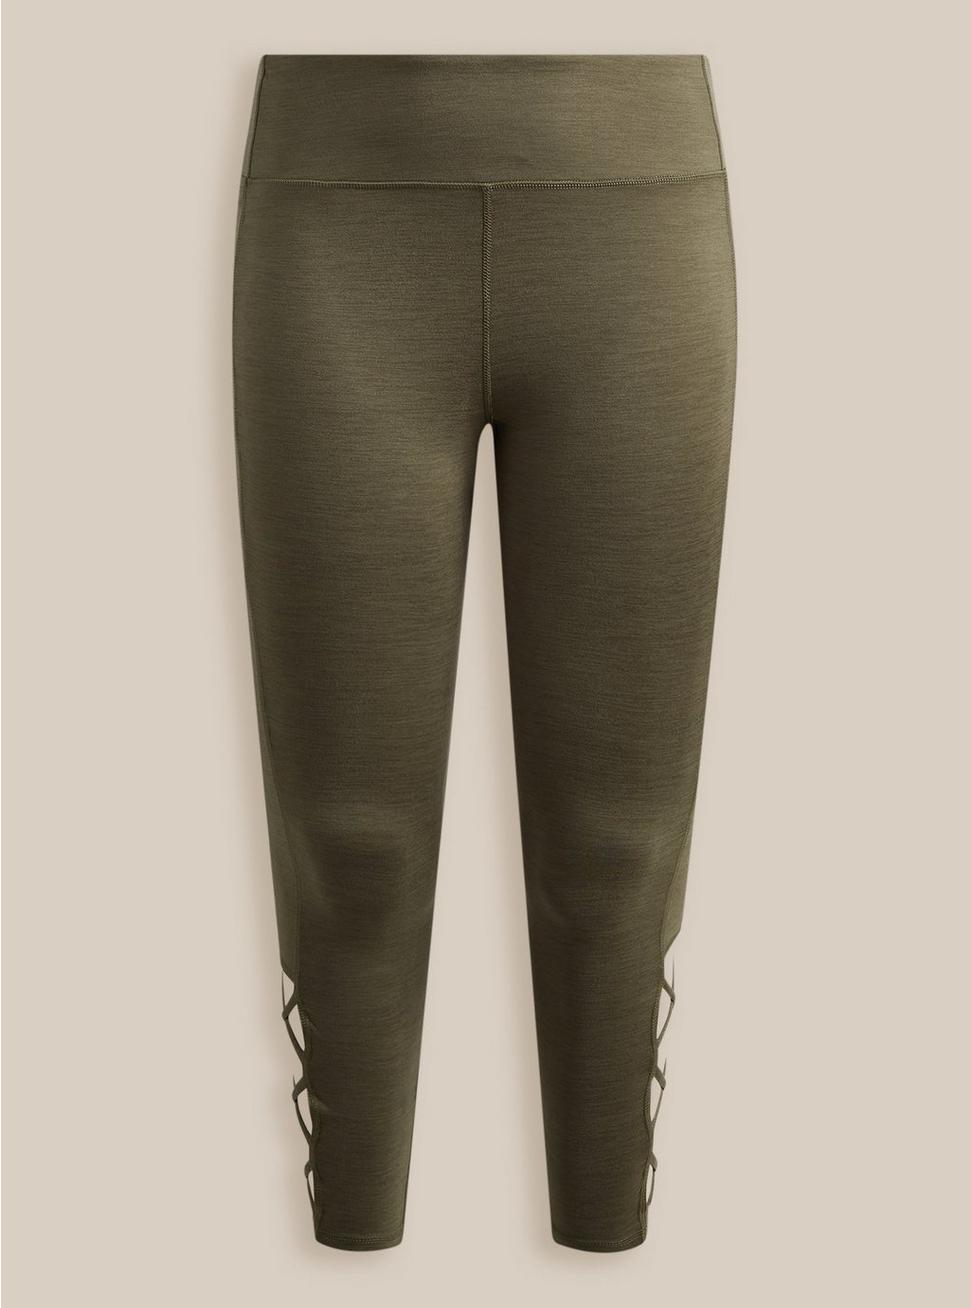 Super Soft Performance Jersey Full Length Active Legging With Lattice Detail, DUSTY OLIVE, hi-res